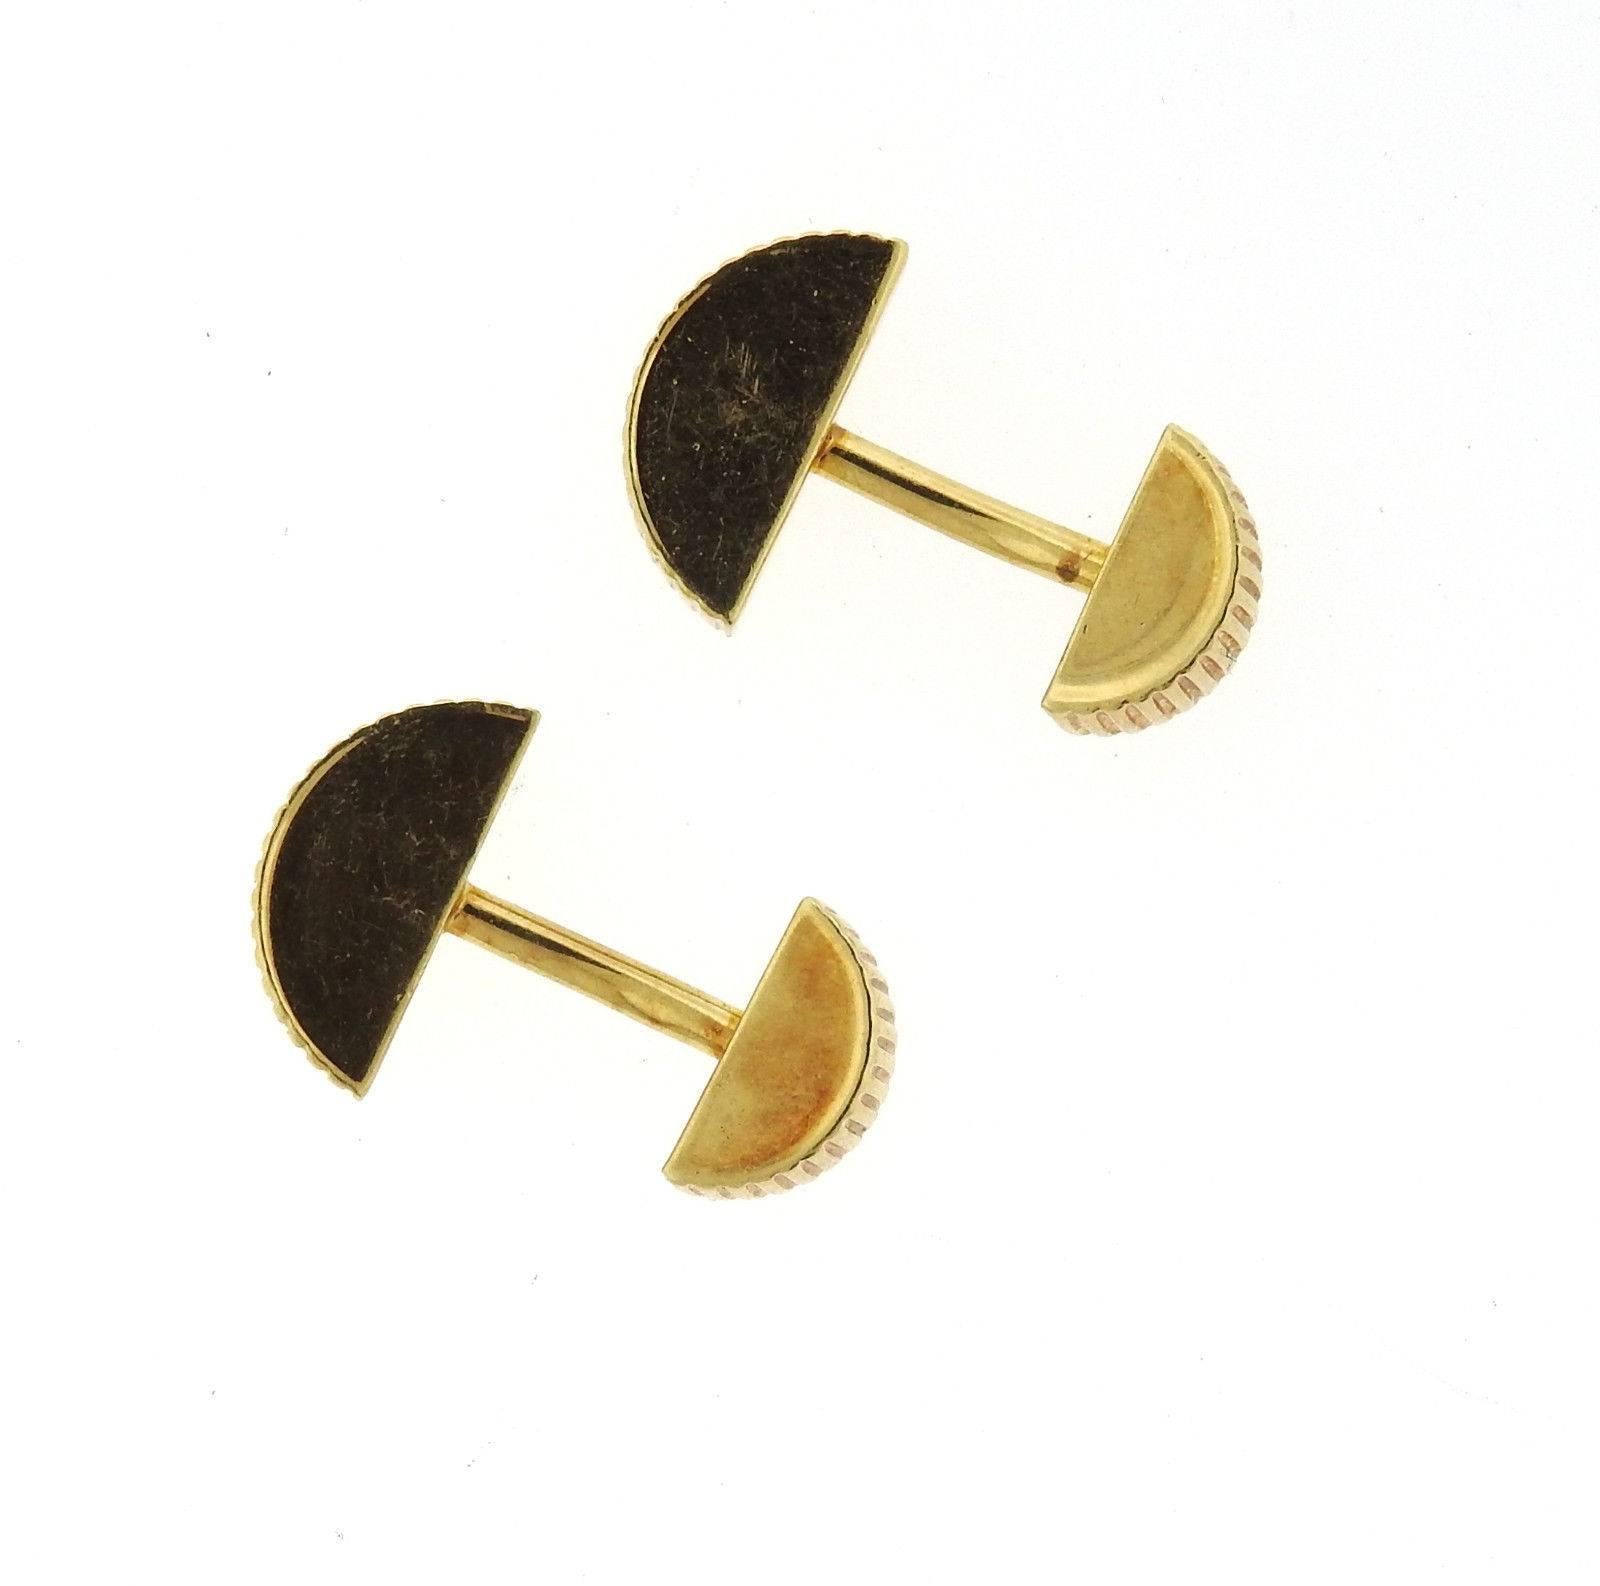 A pair of 18k yellow gold cufflinks by Tiffany & Co.  The cufflink tops measure 18mm x 8mm x 5mm.  Marked: T & Co, 750, 2003.  The weight of the cufflinks is 26.5 grams.